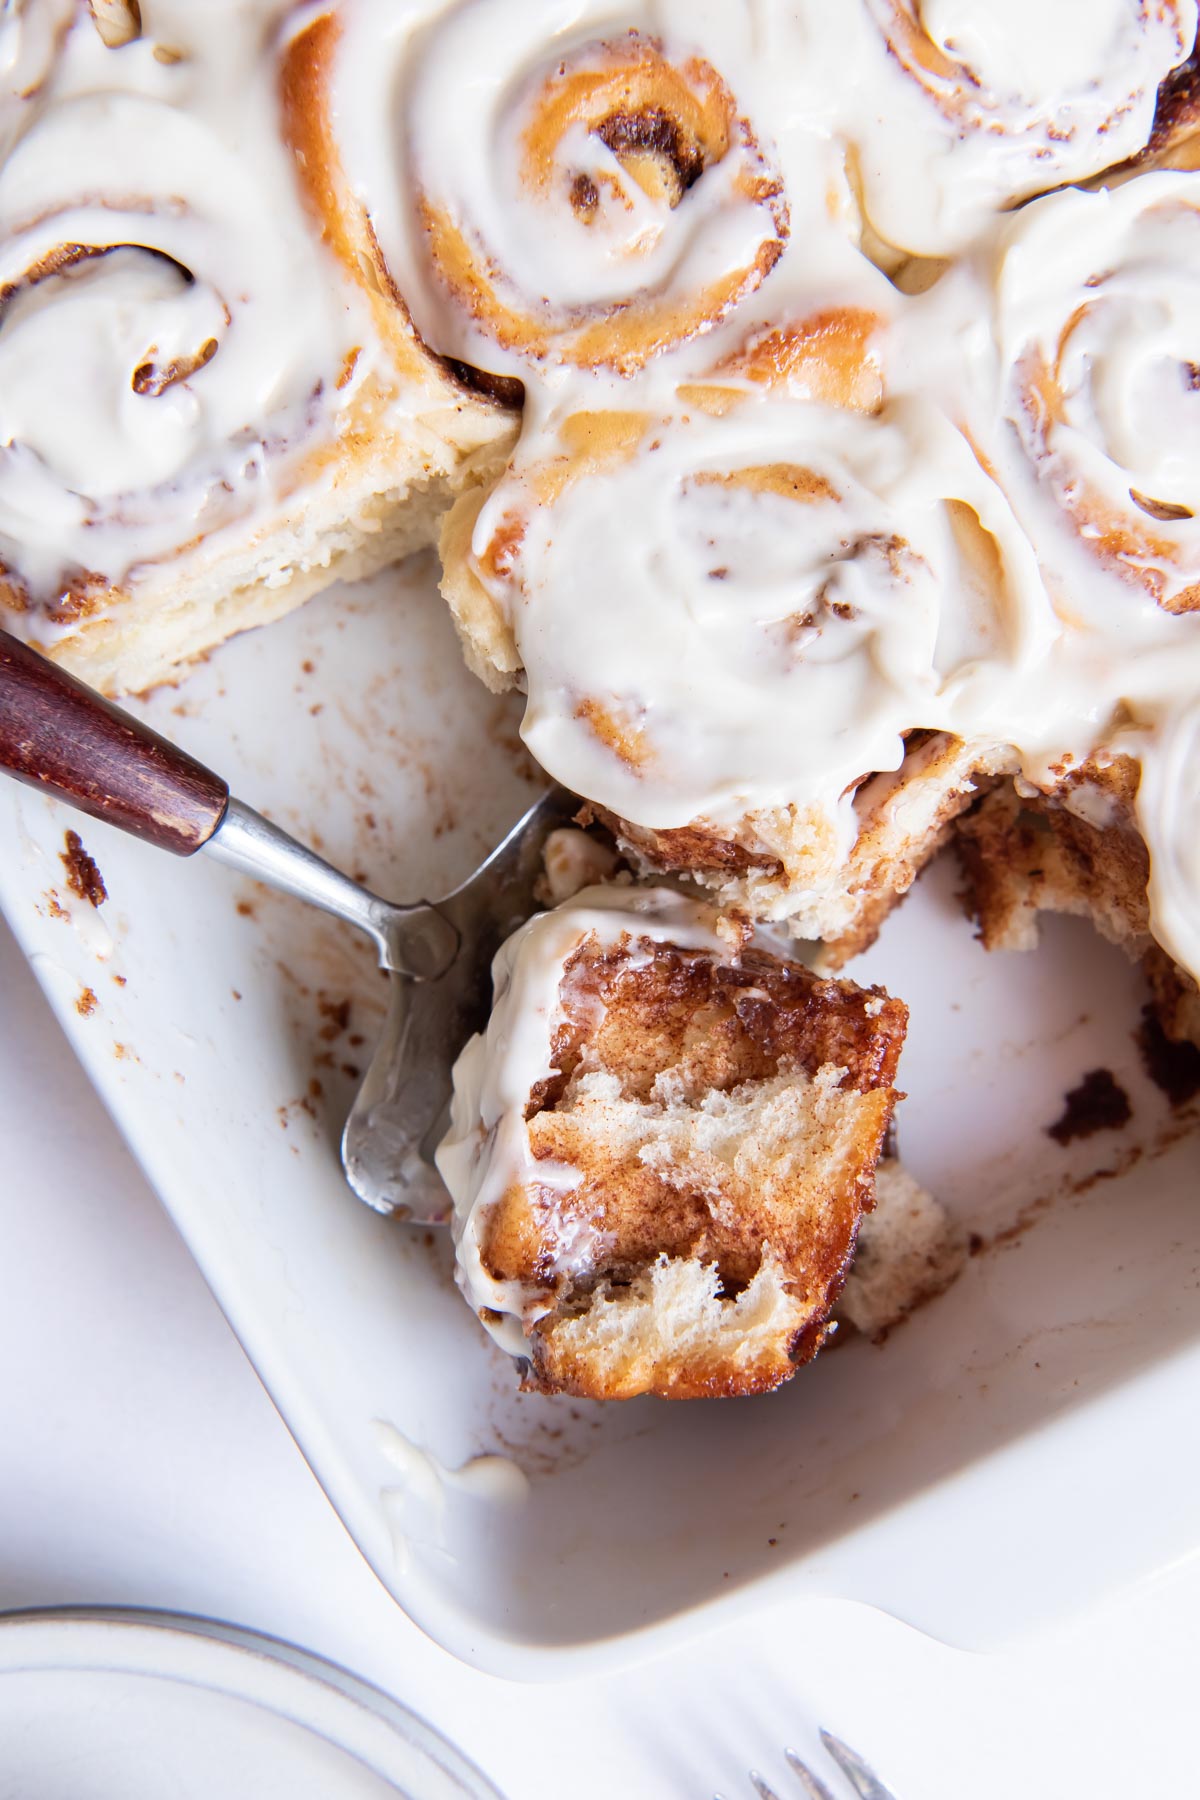 Cinnamon rolls in baking dish with a side view of cinnamon roll on a spatula.